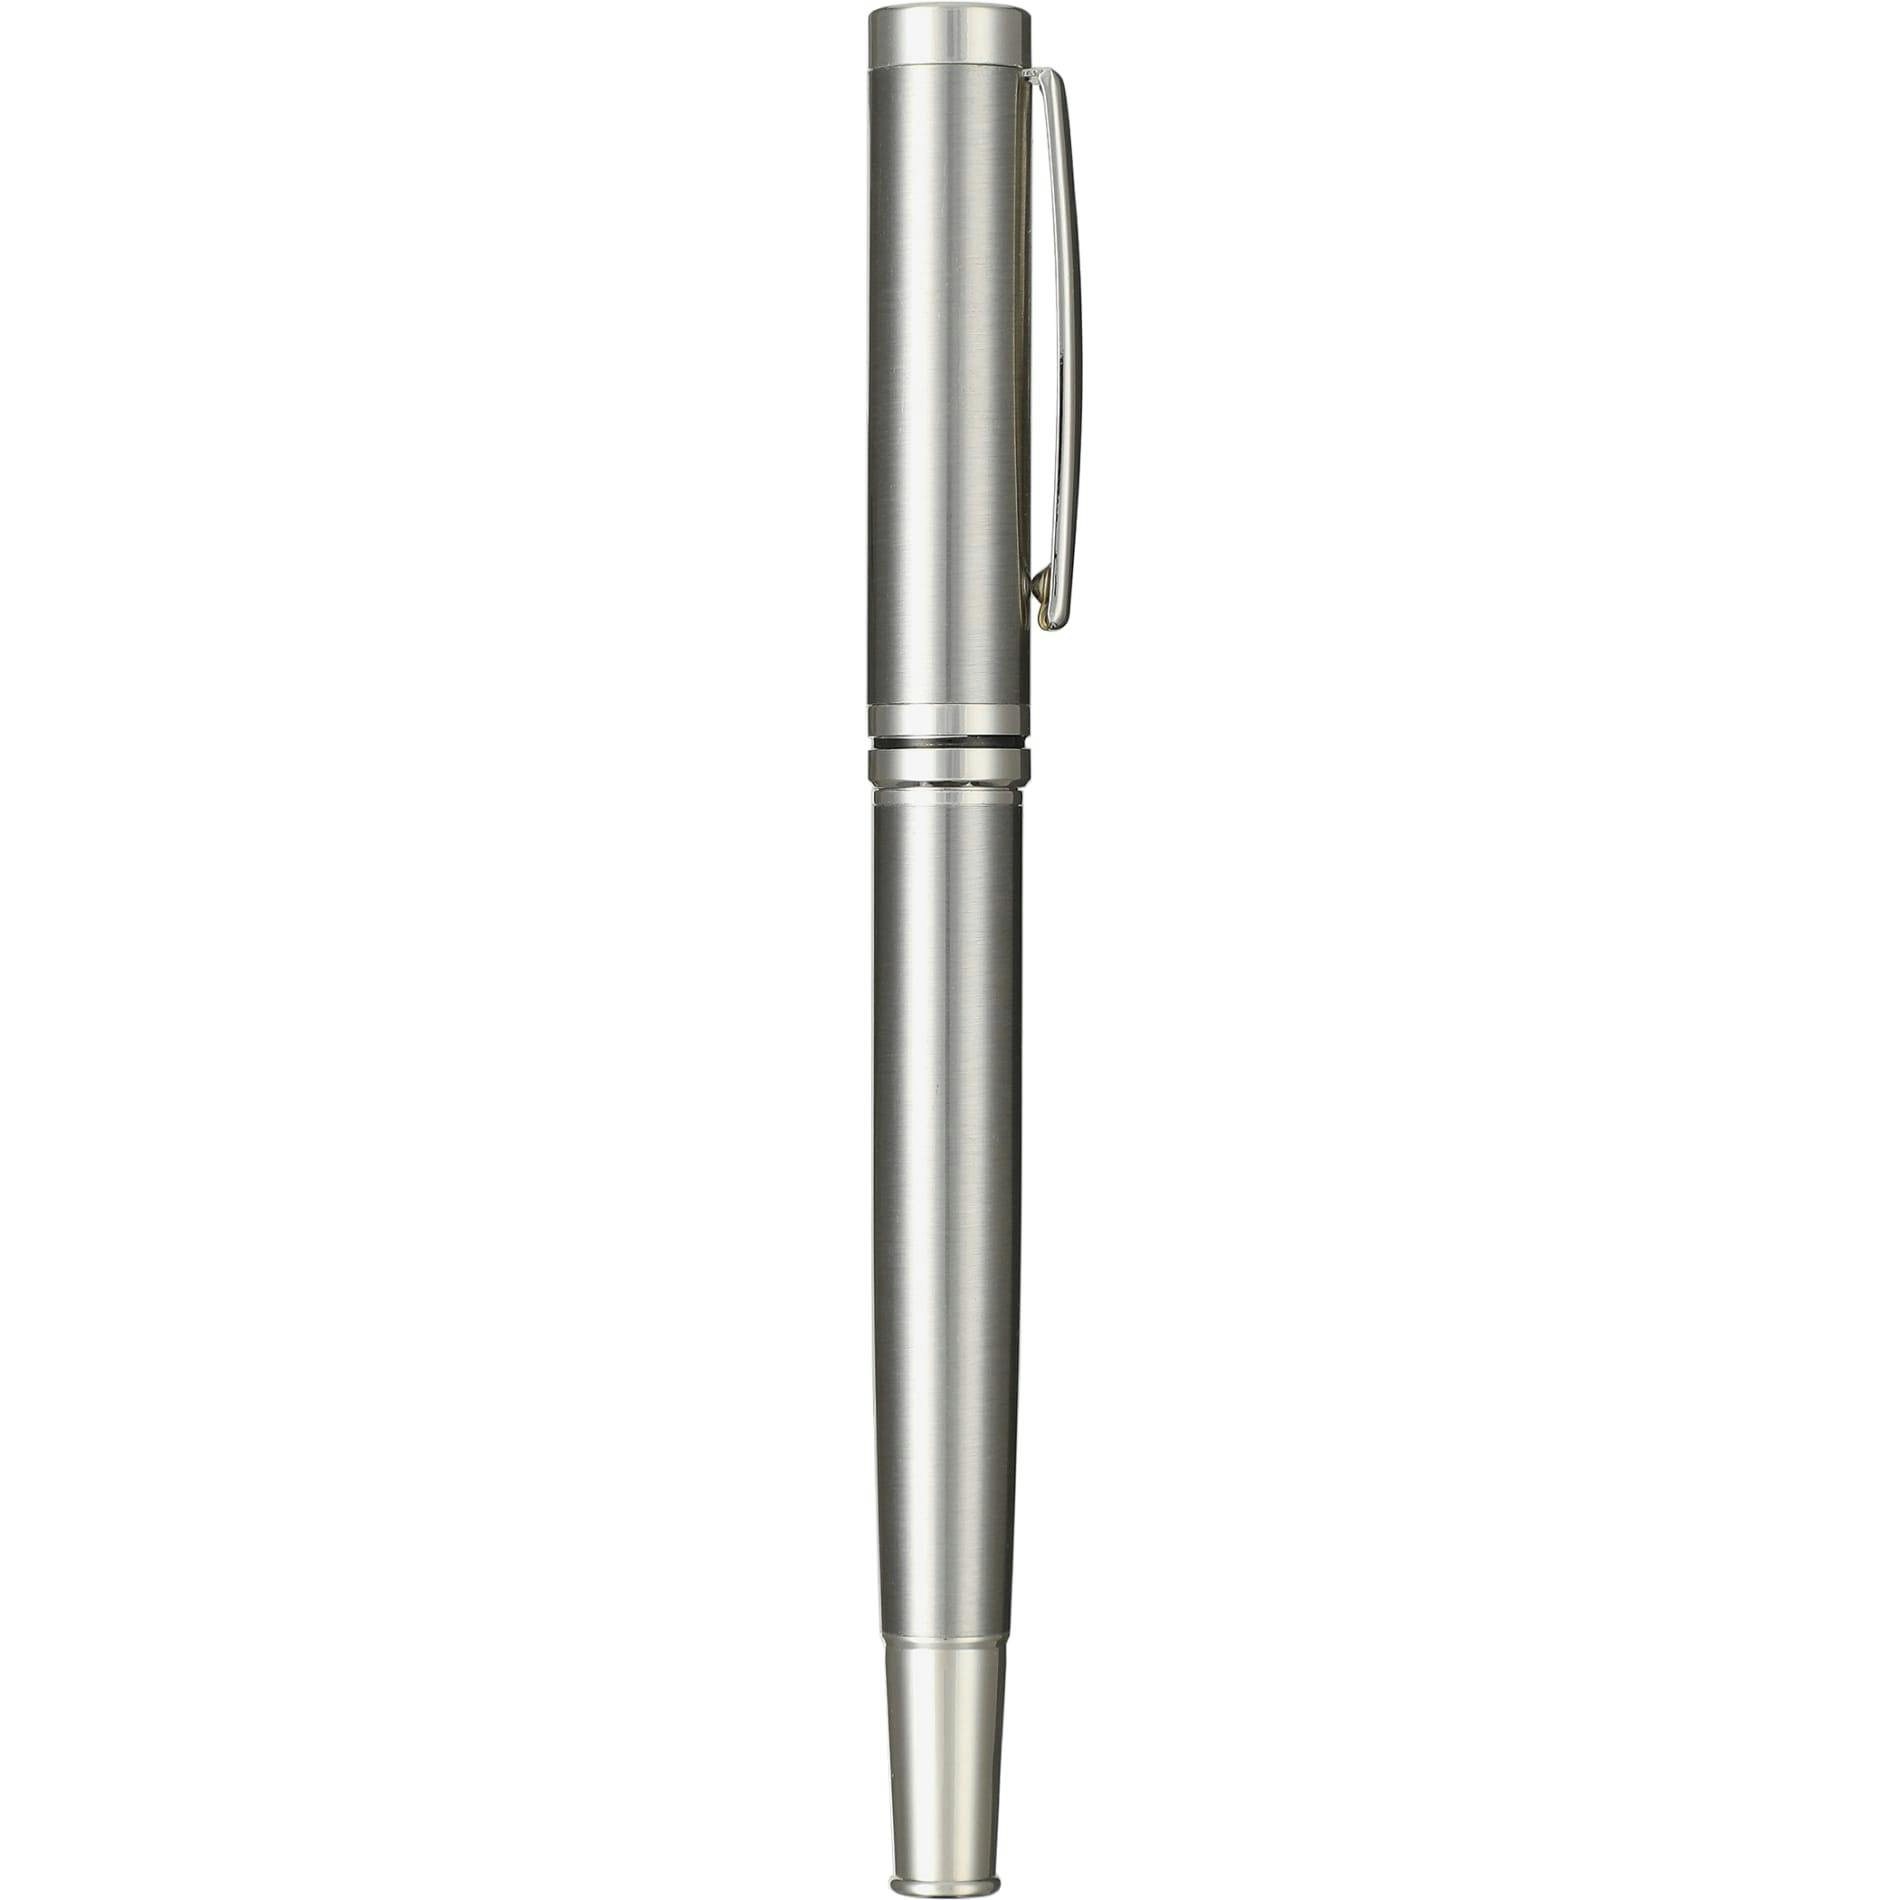 Recycled Stainless Steel Rollerball Pen - additional Image 3